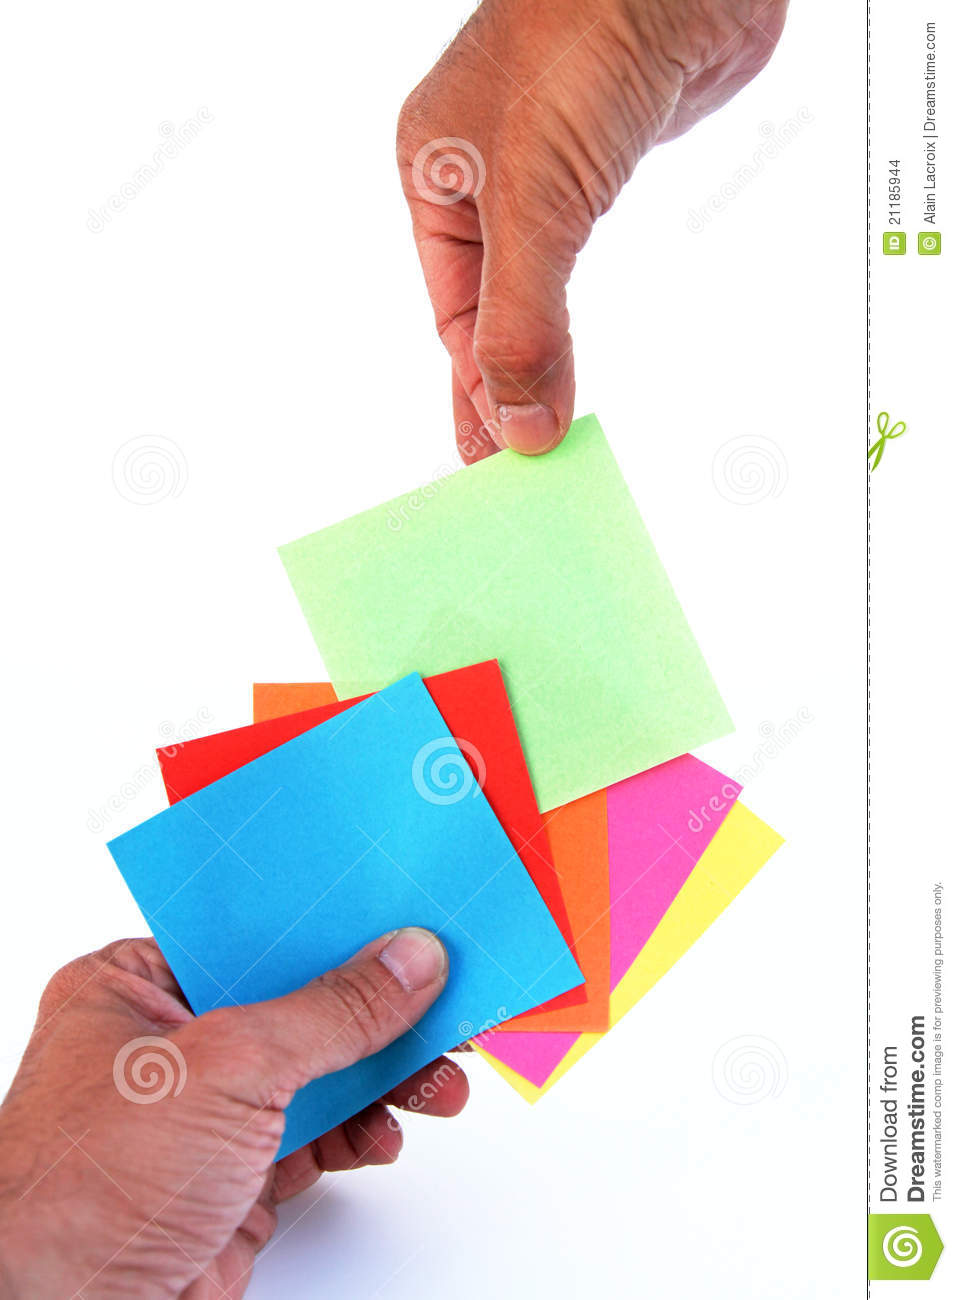 Clip Art Picking Up Cards